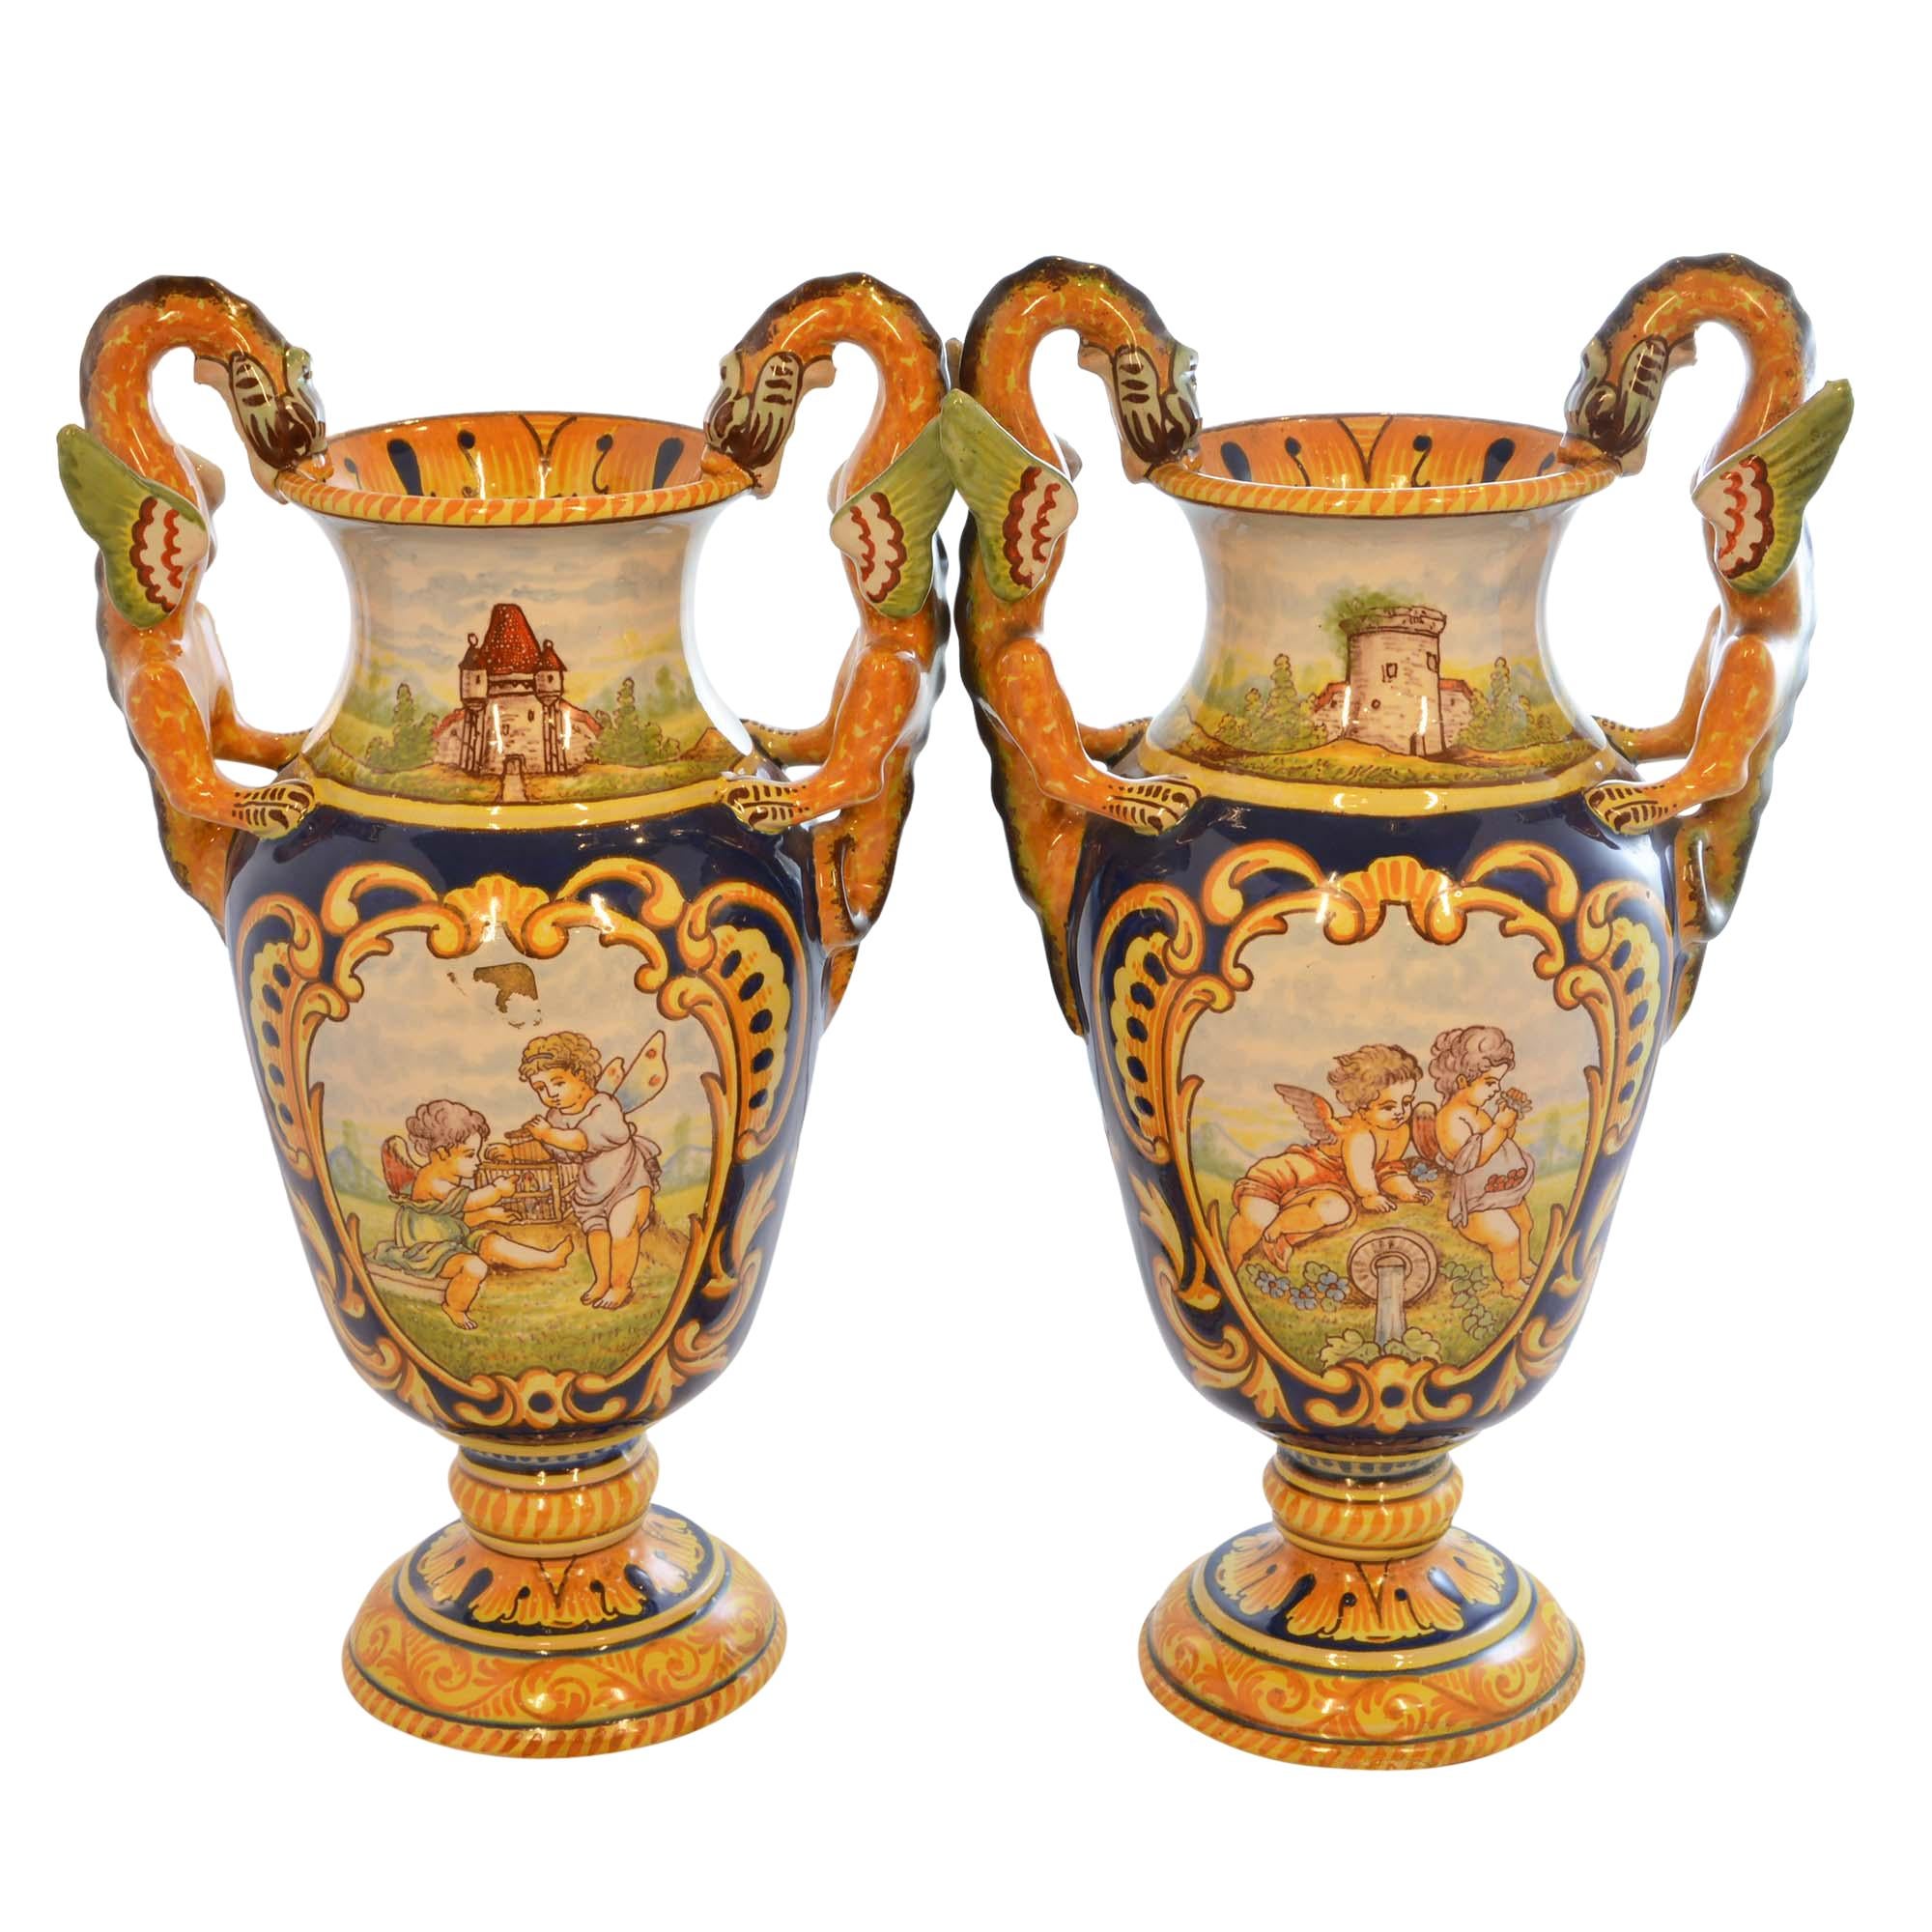 Faience vases feature Rouen hand painted decoration throughout and are from Nevers in Northern France. Both vases feature cherubs in the hand painted body scene and castles on the necks. One features cherubs enjoying the garden; the other has